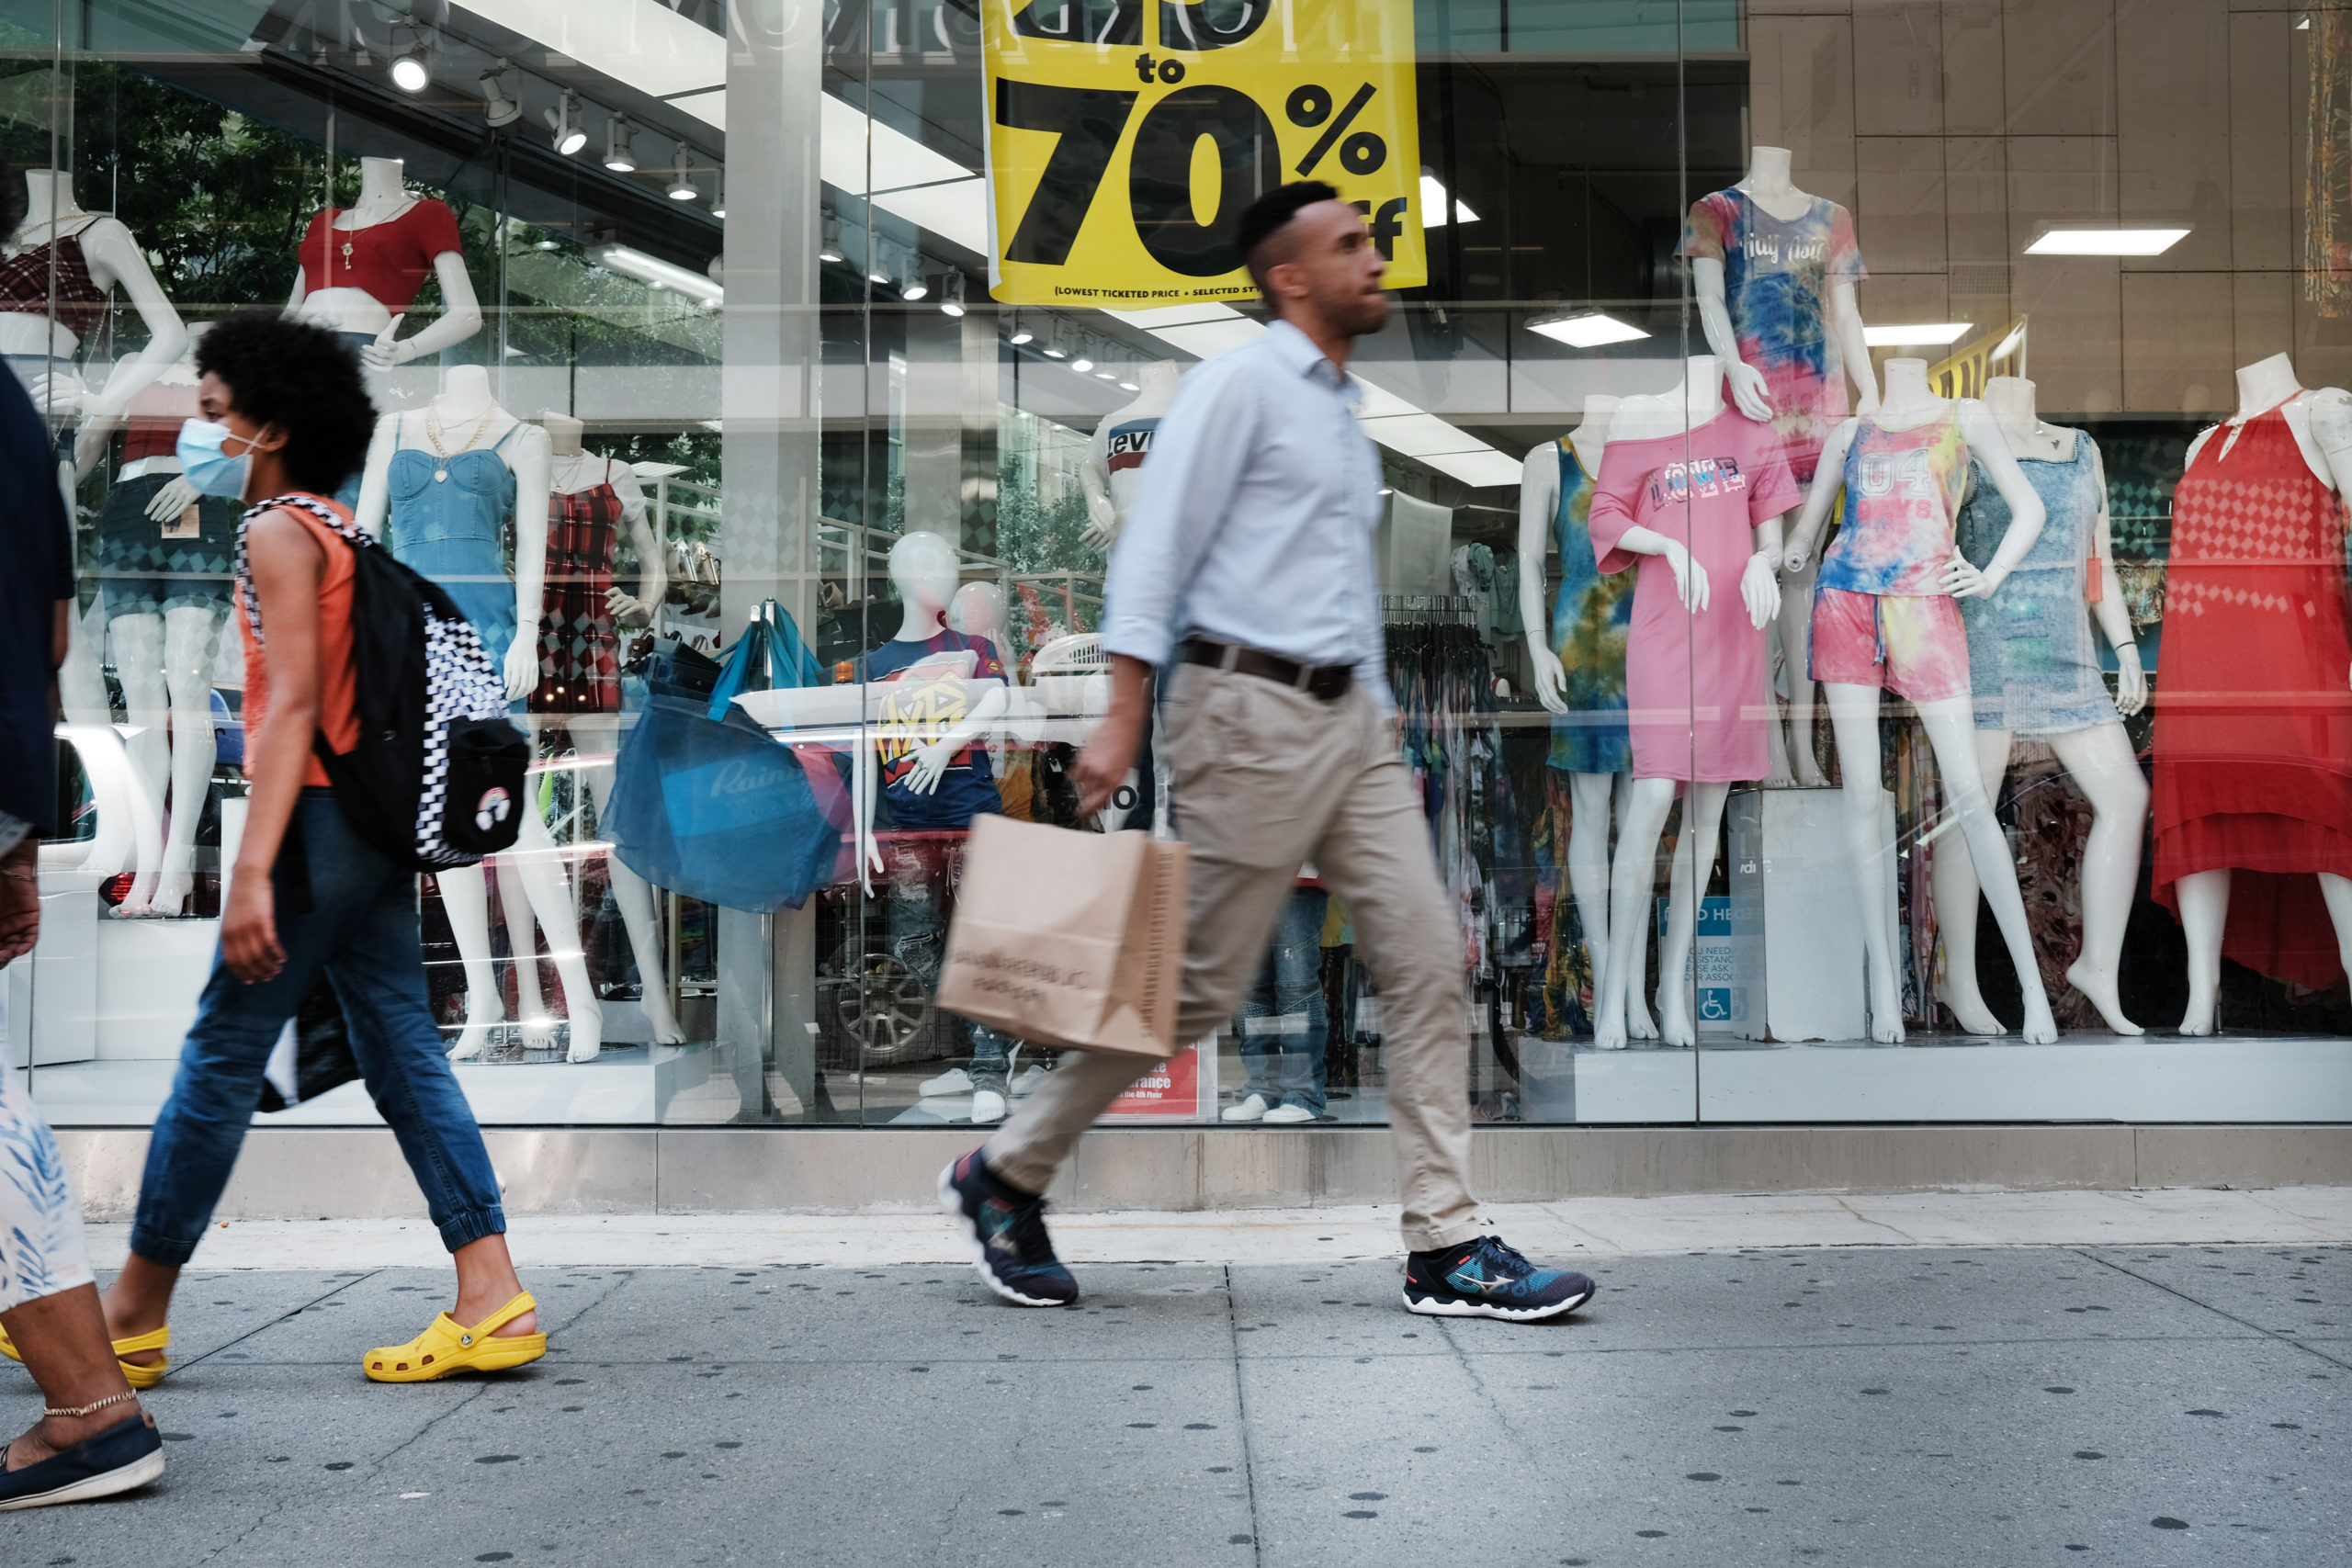 People walk through a shopping district on July 16 in New York City. (Spencer Platt/Getty Images)